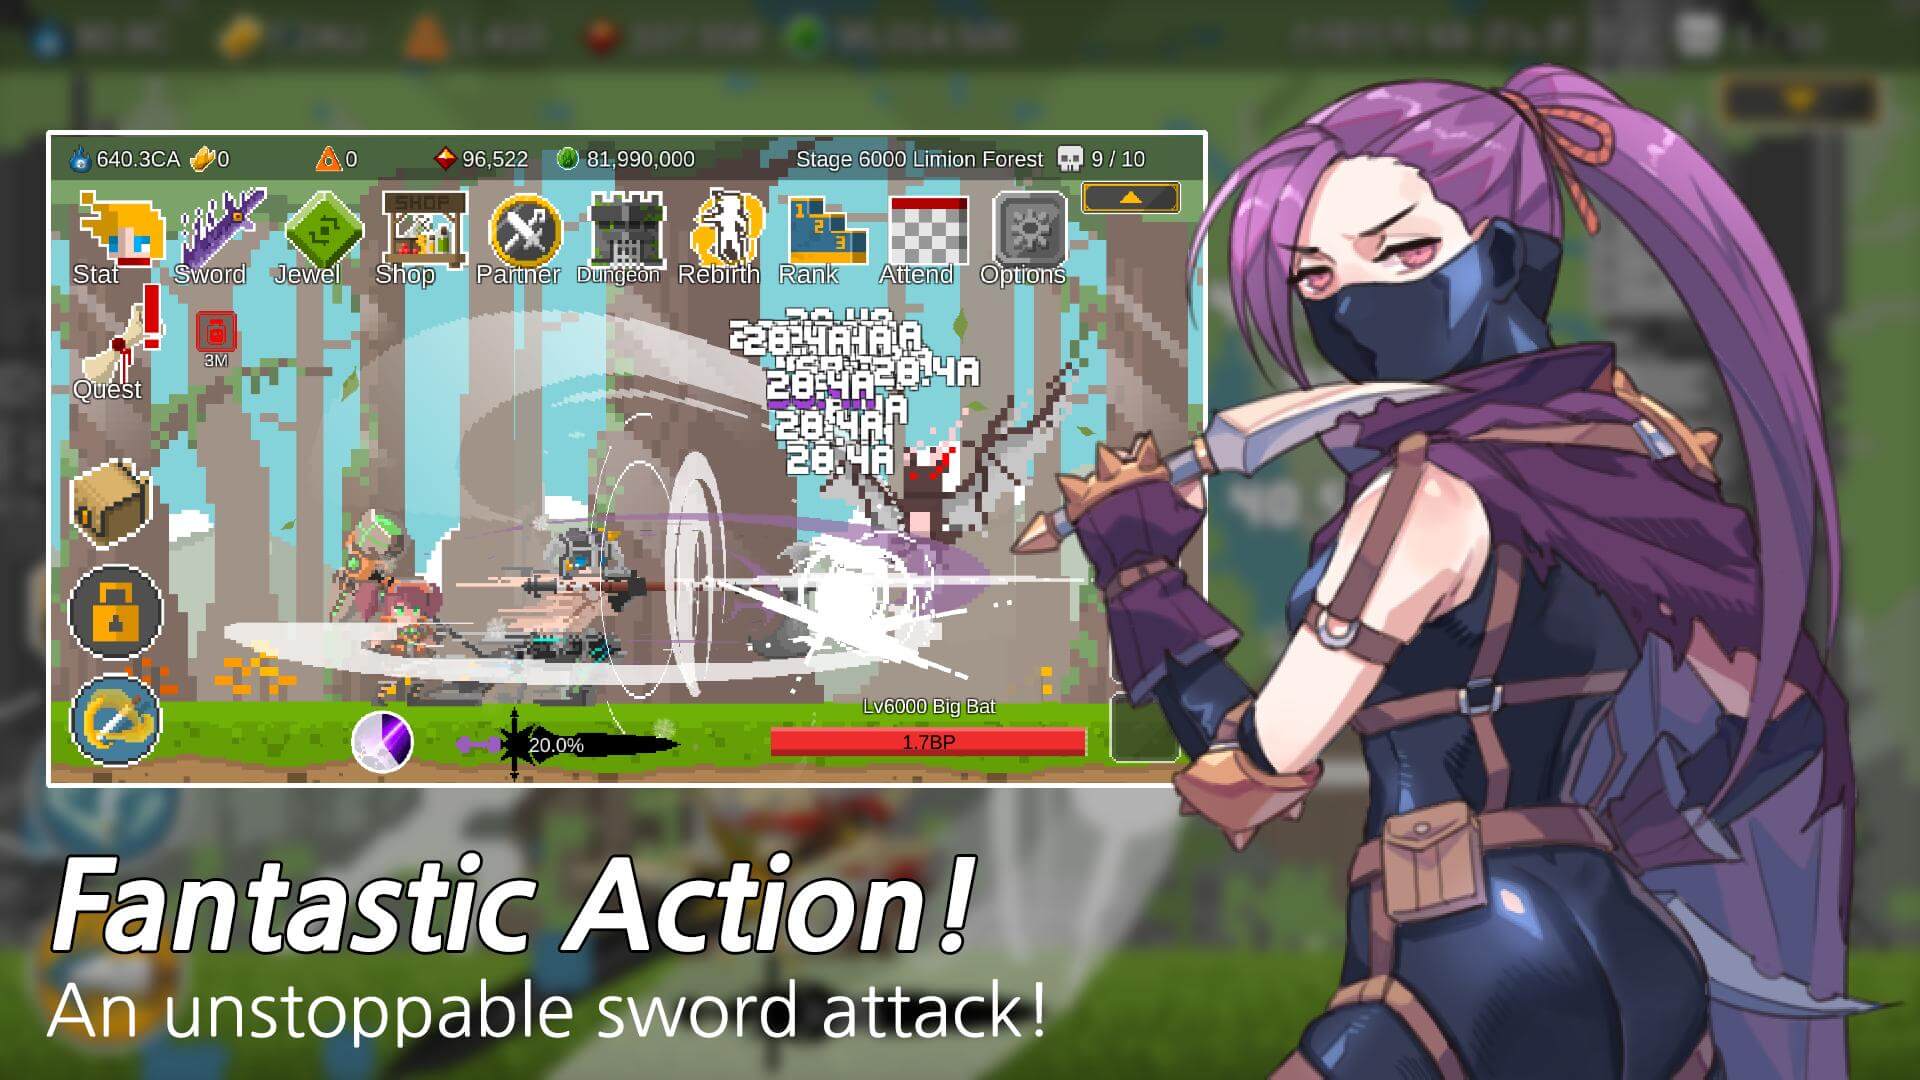 Game RPG Offline Android Ego Sword Idle Clicker RPG